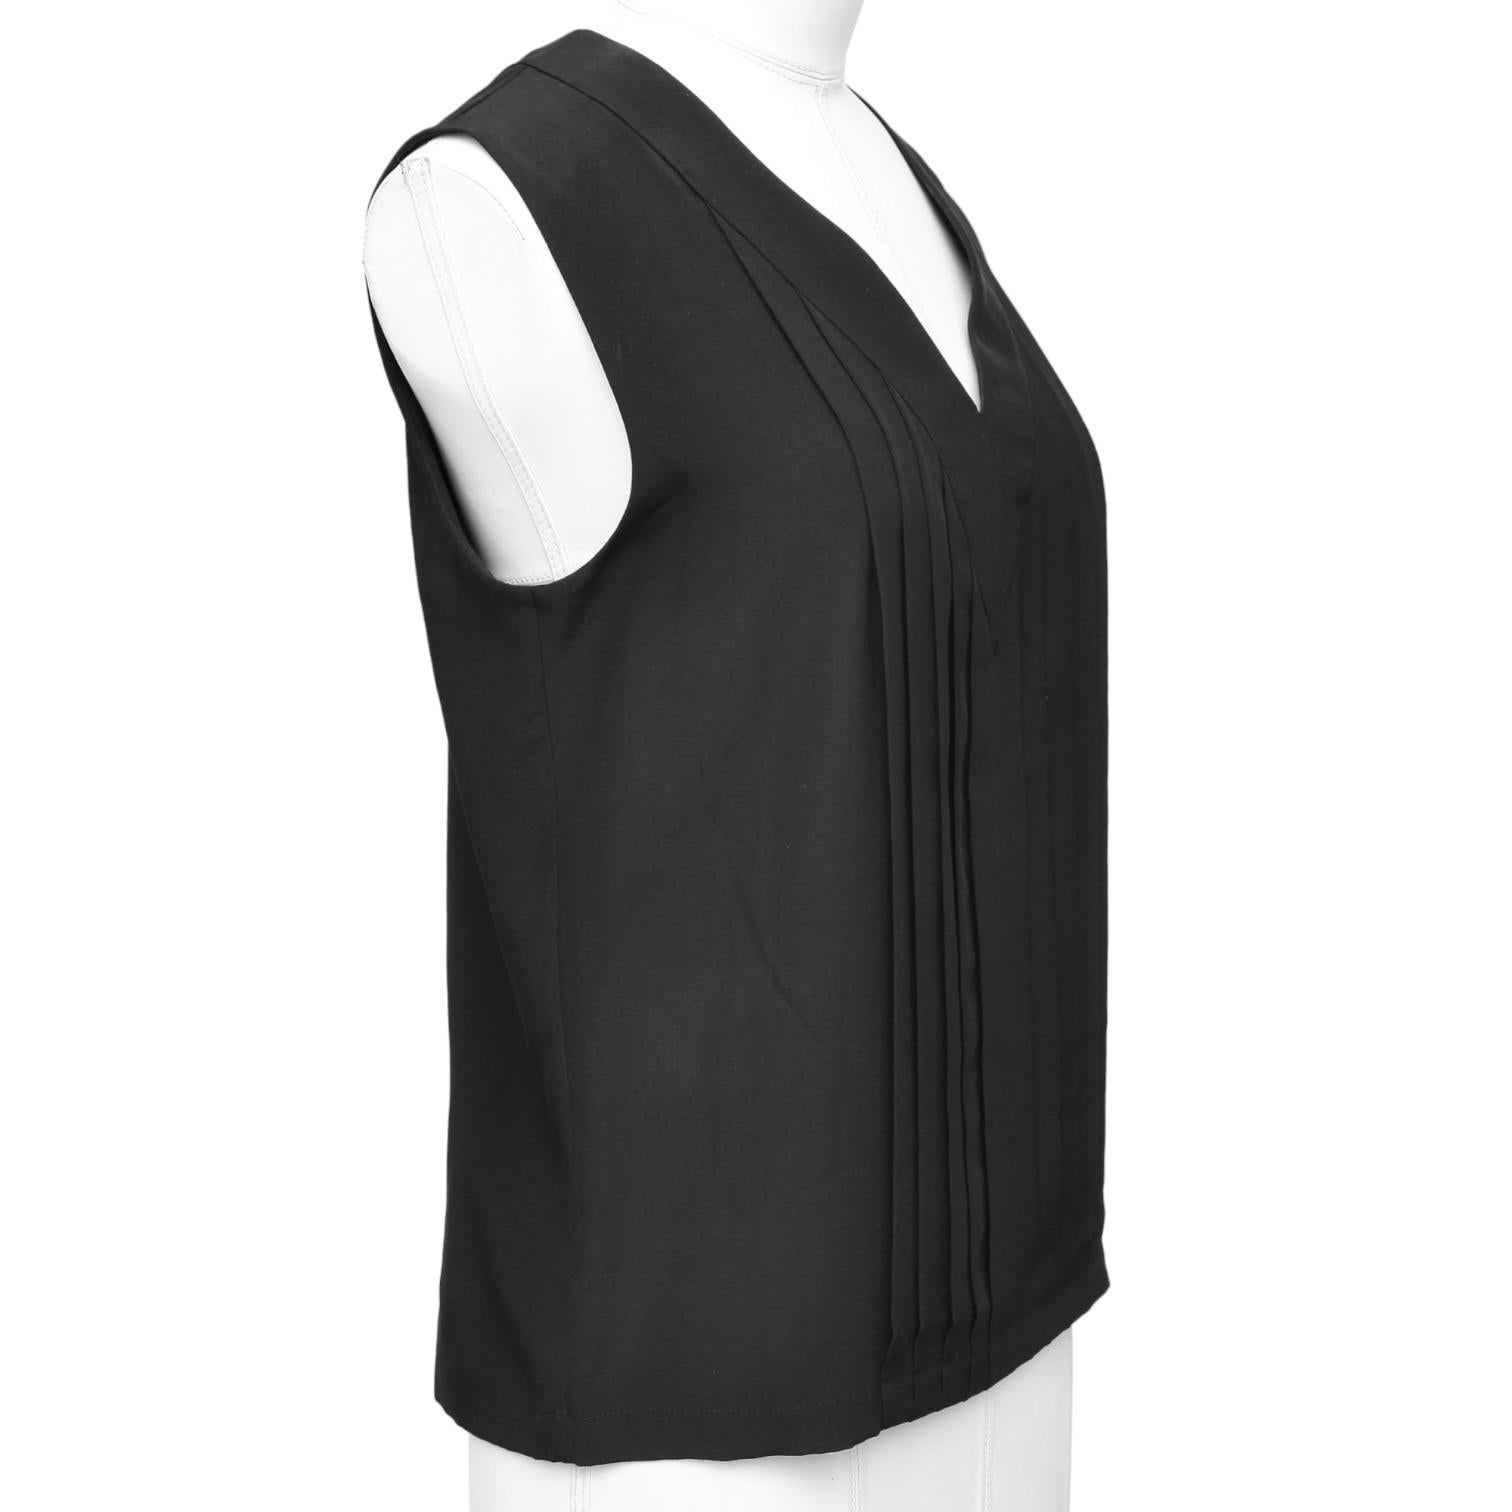 GUARANTEED AUTHENTIC CHANEL SLEEVELESS BLACK SILK BLOUSE

Design:
 - Sleeveless lightweight black silk blouse.
 - V-neckline, pleated front.
 - Rear covered signature buttons.

Material: 100% Silk

Size: 36

Measurements (Approximate laid flat):
 -